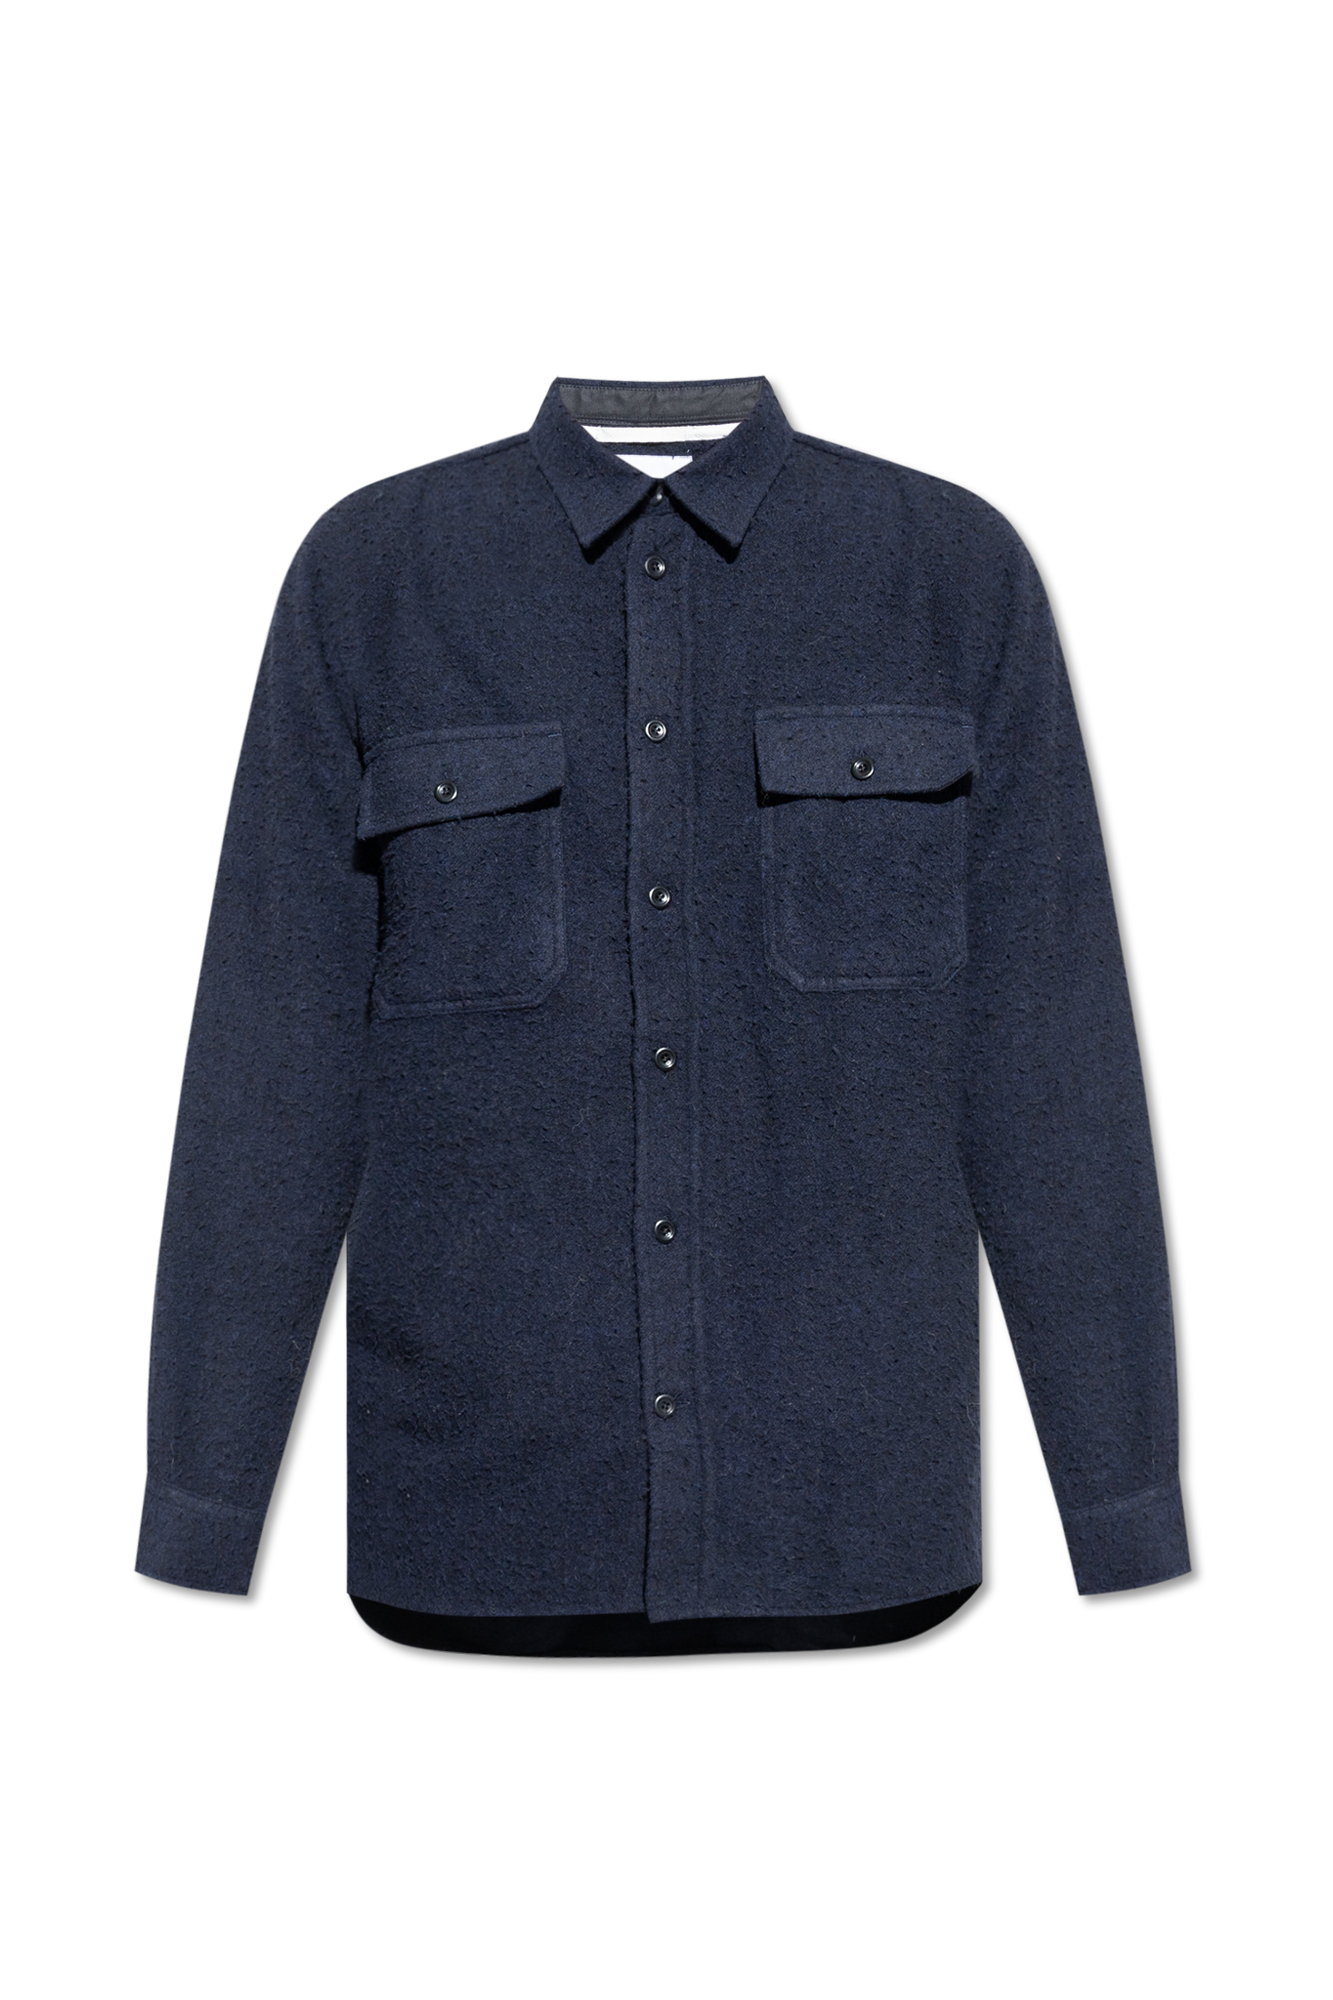 Norse Projects ‘Silas’ jacket | Men's Clothing | Vitkac